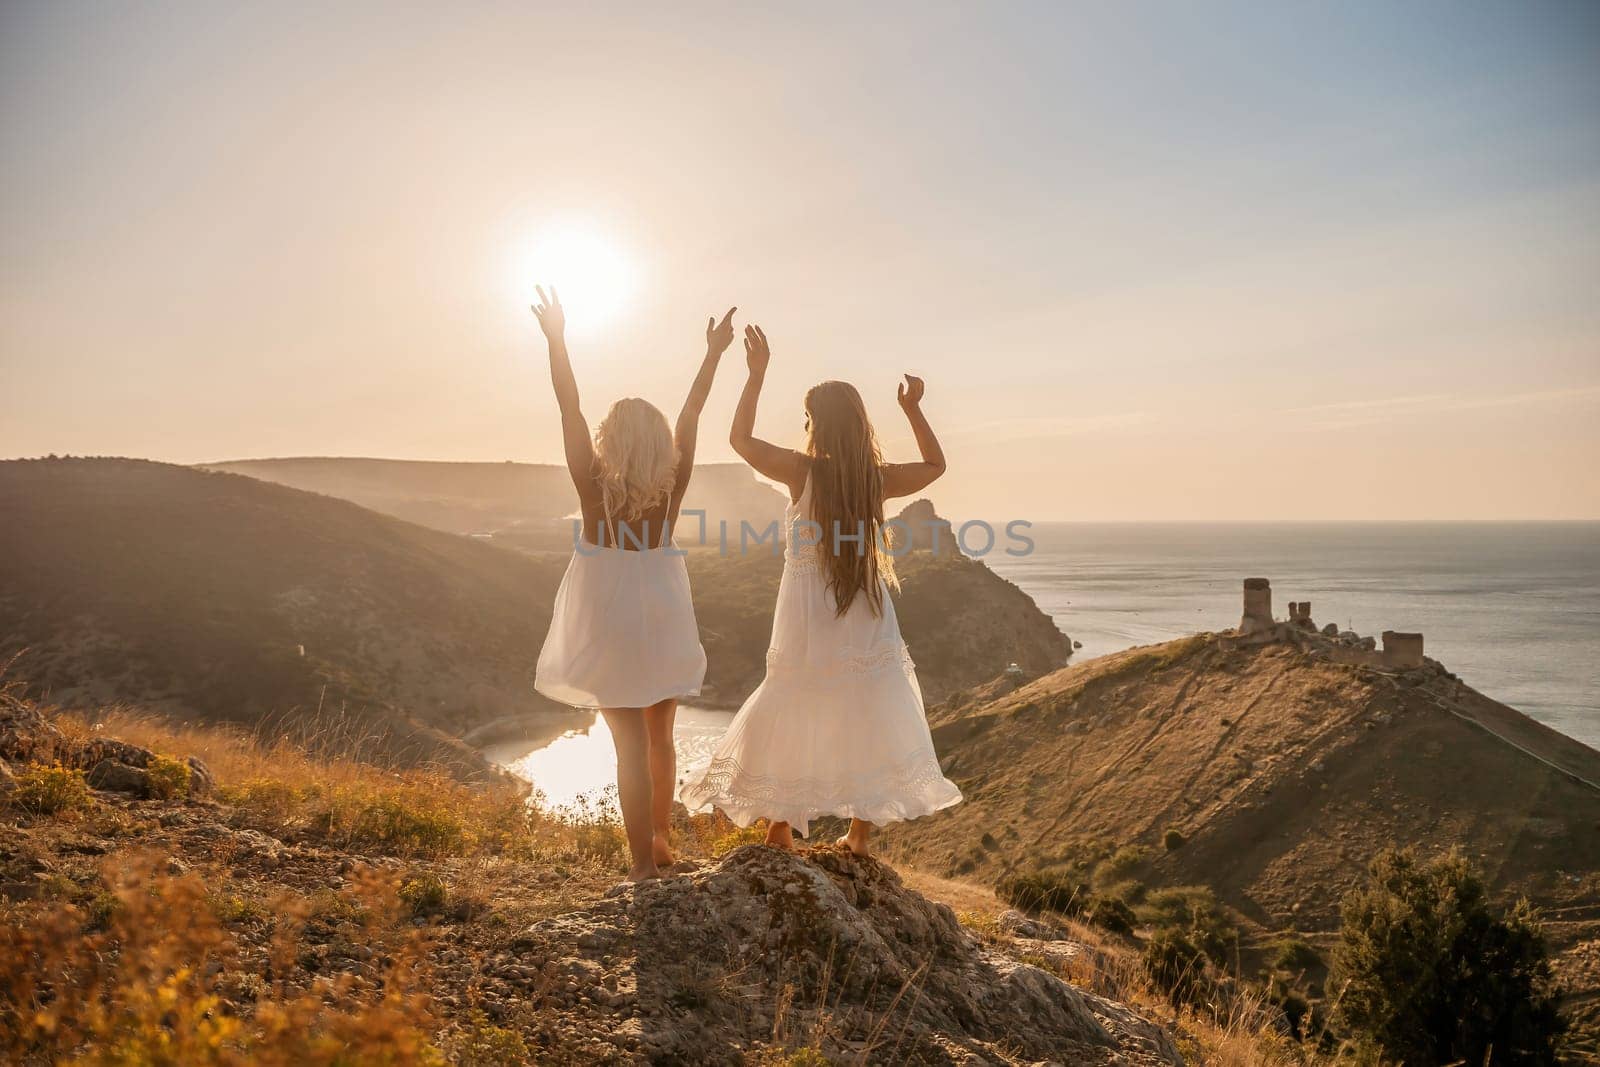 Two women are standing on a hill overlooking the ocean. They are holding hands and looking out at the water. The scene is peaceful and serene, with the sun shining brightly in the background. by Matiunina